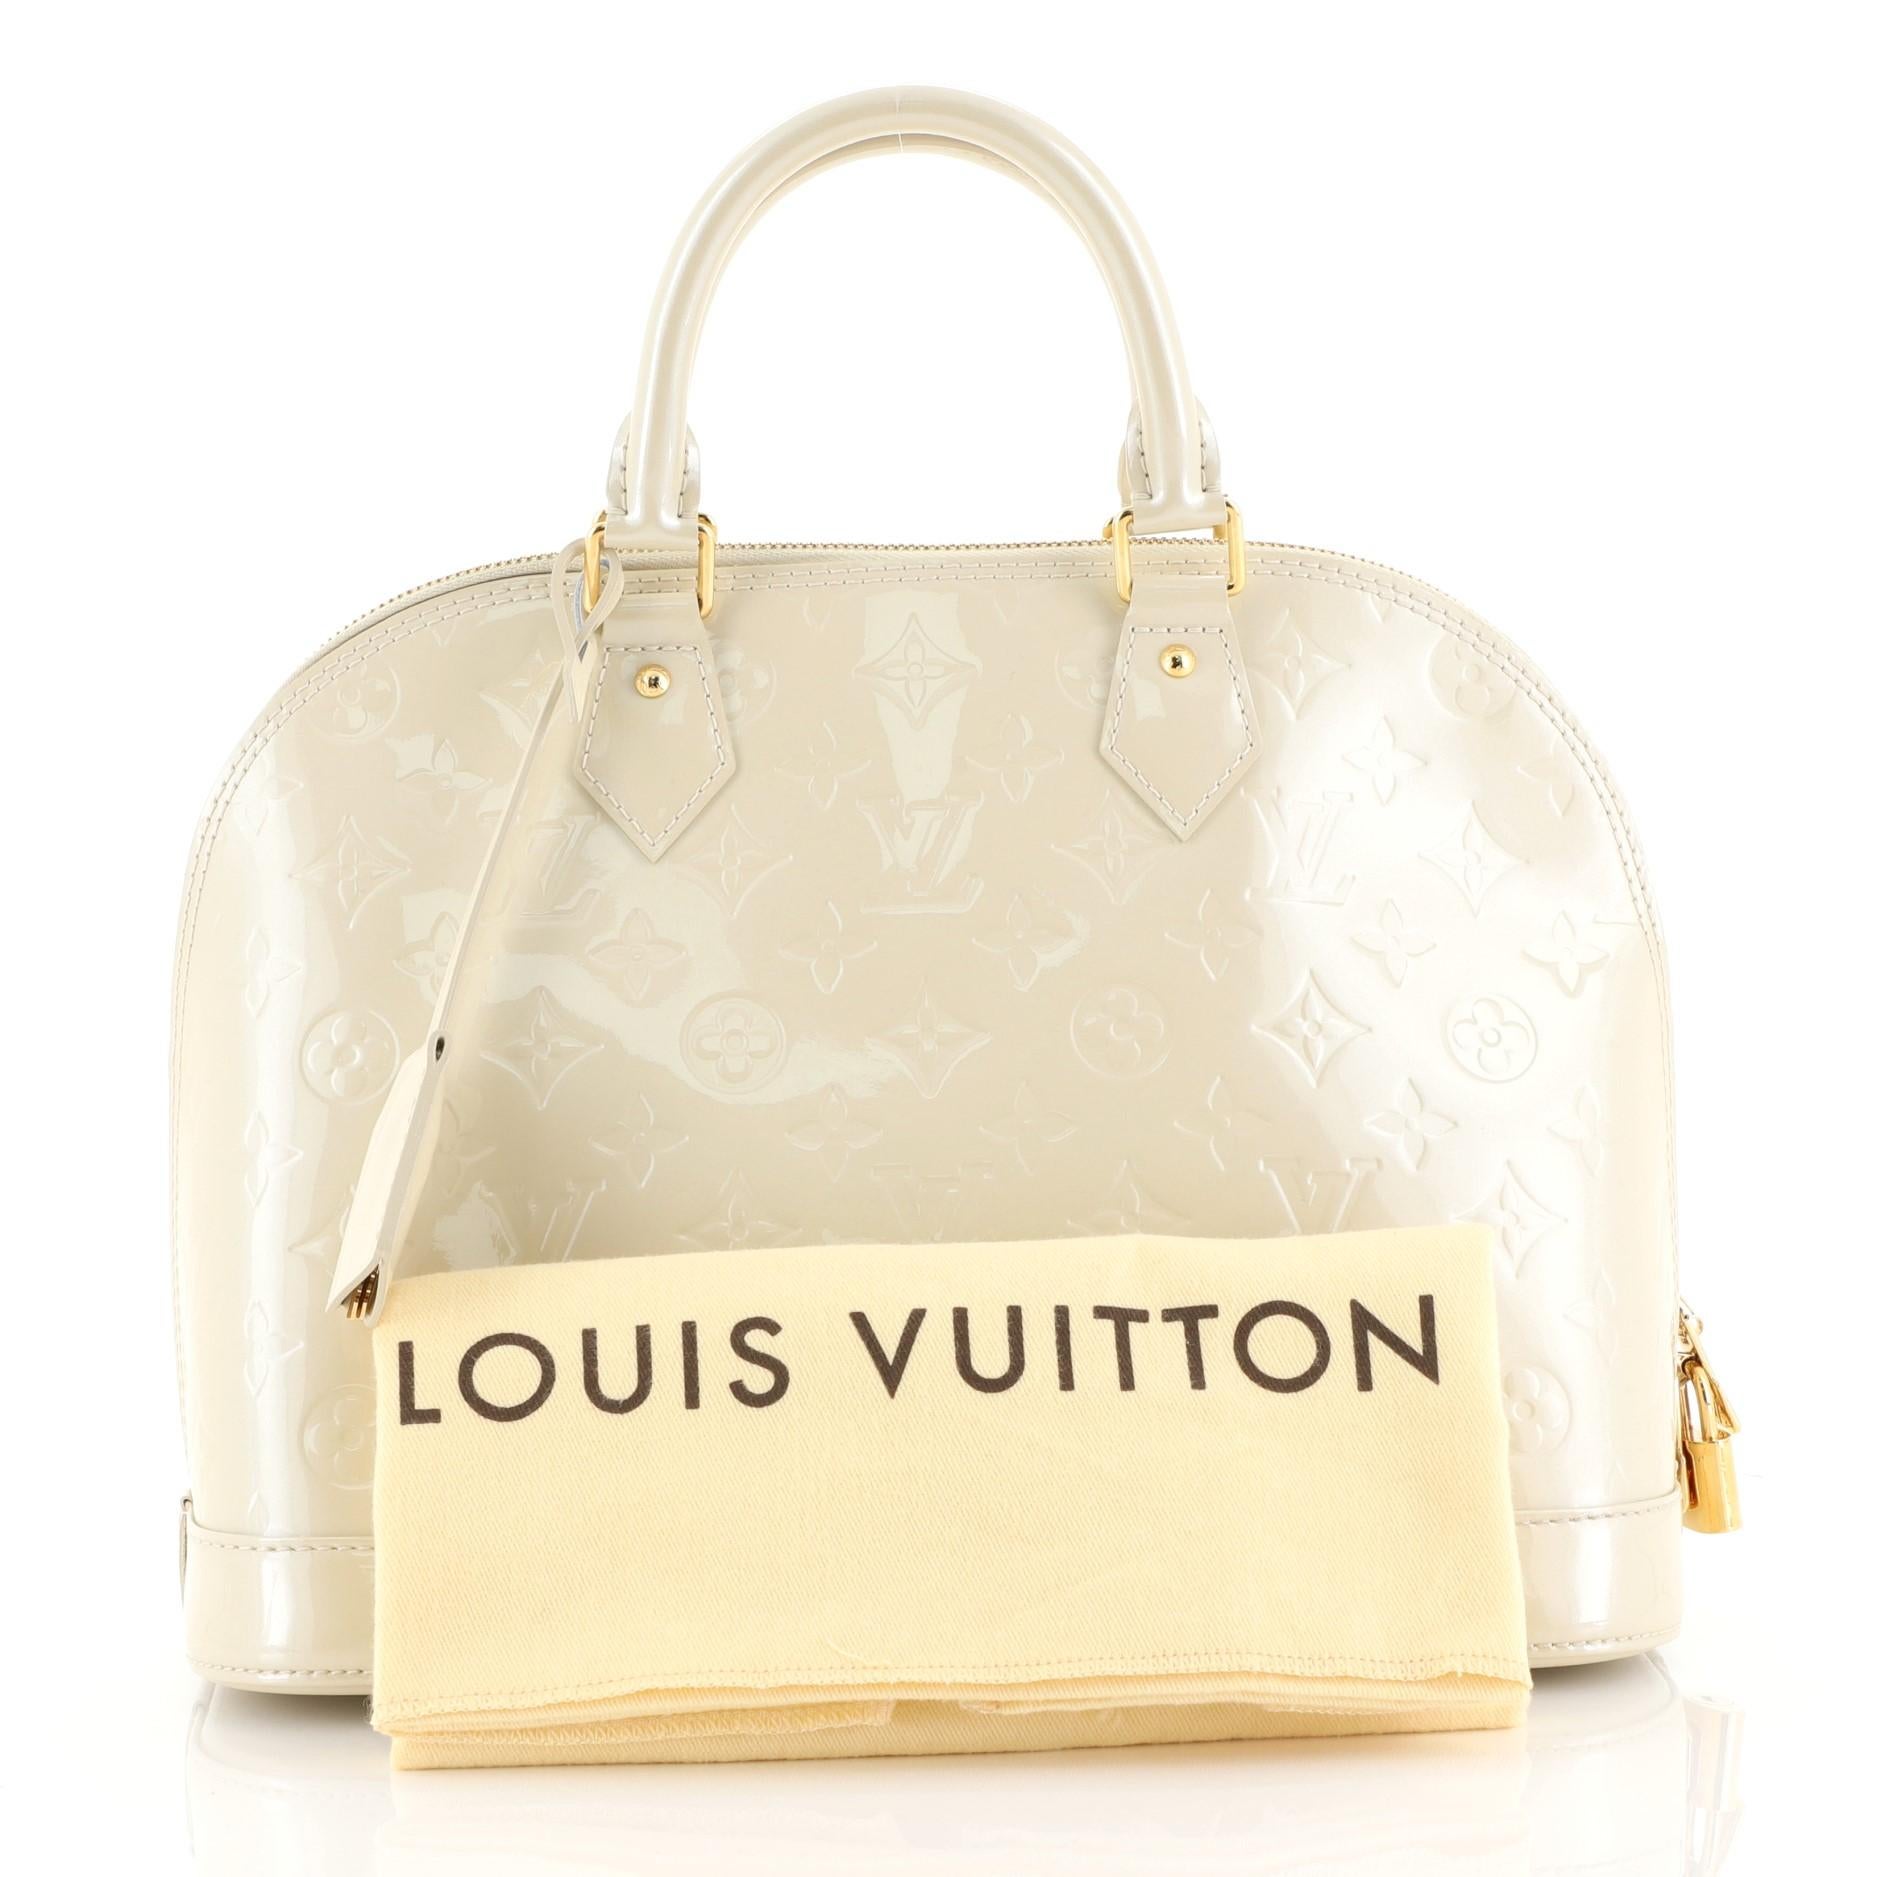 This Louis Vuitton Alma Handbag Monogram Vernis PM, crafted from neutral monogram vernis leather, features dual rolled handles, protective base studs, and gold-tone hardware. Its zip closure opens to a neutral fabric interior with slip pockets.